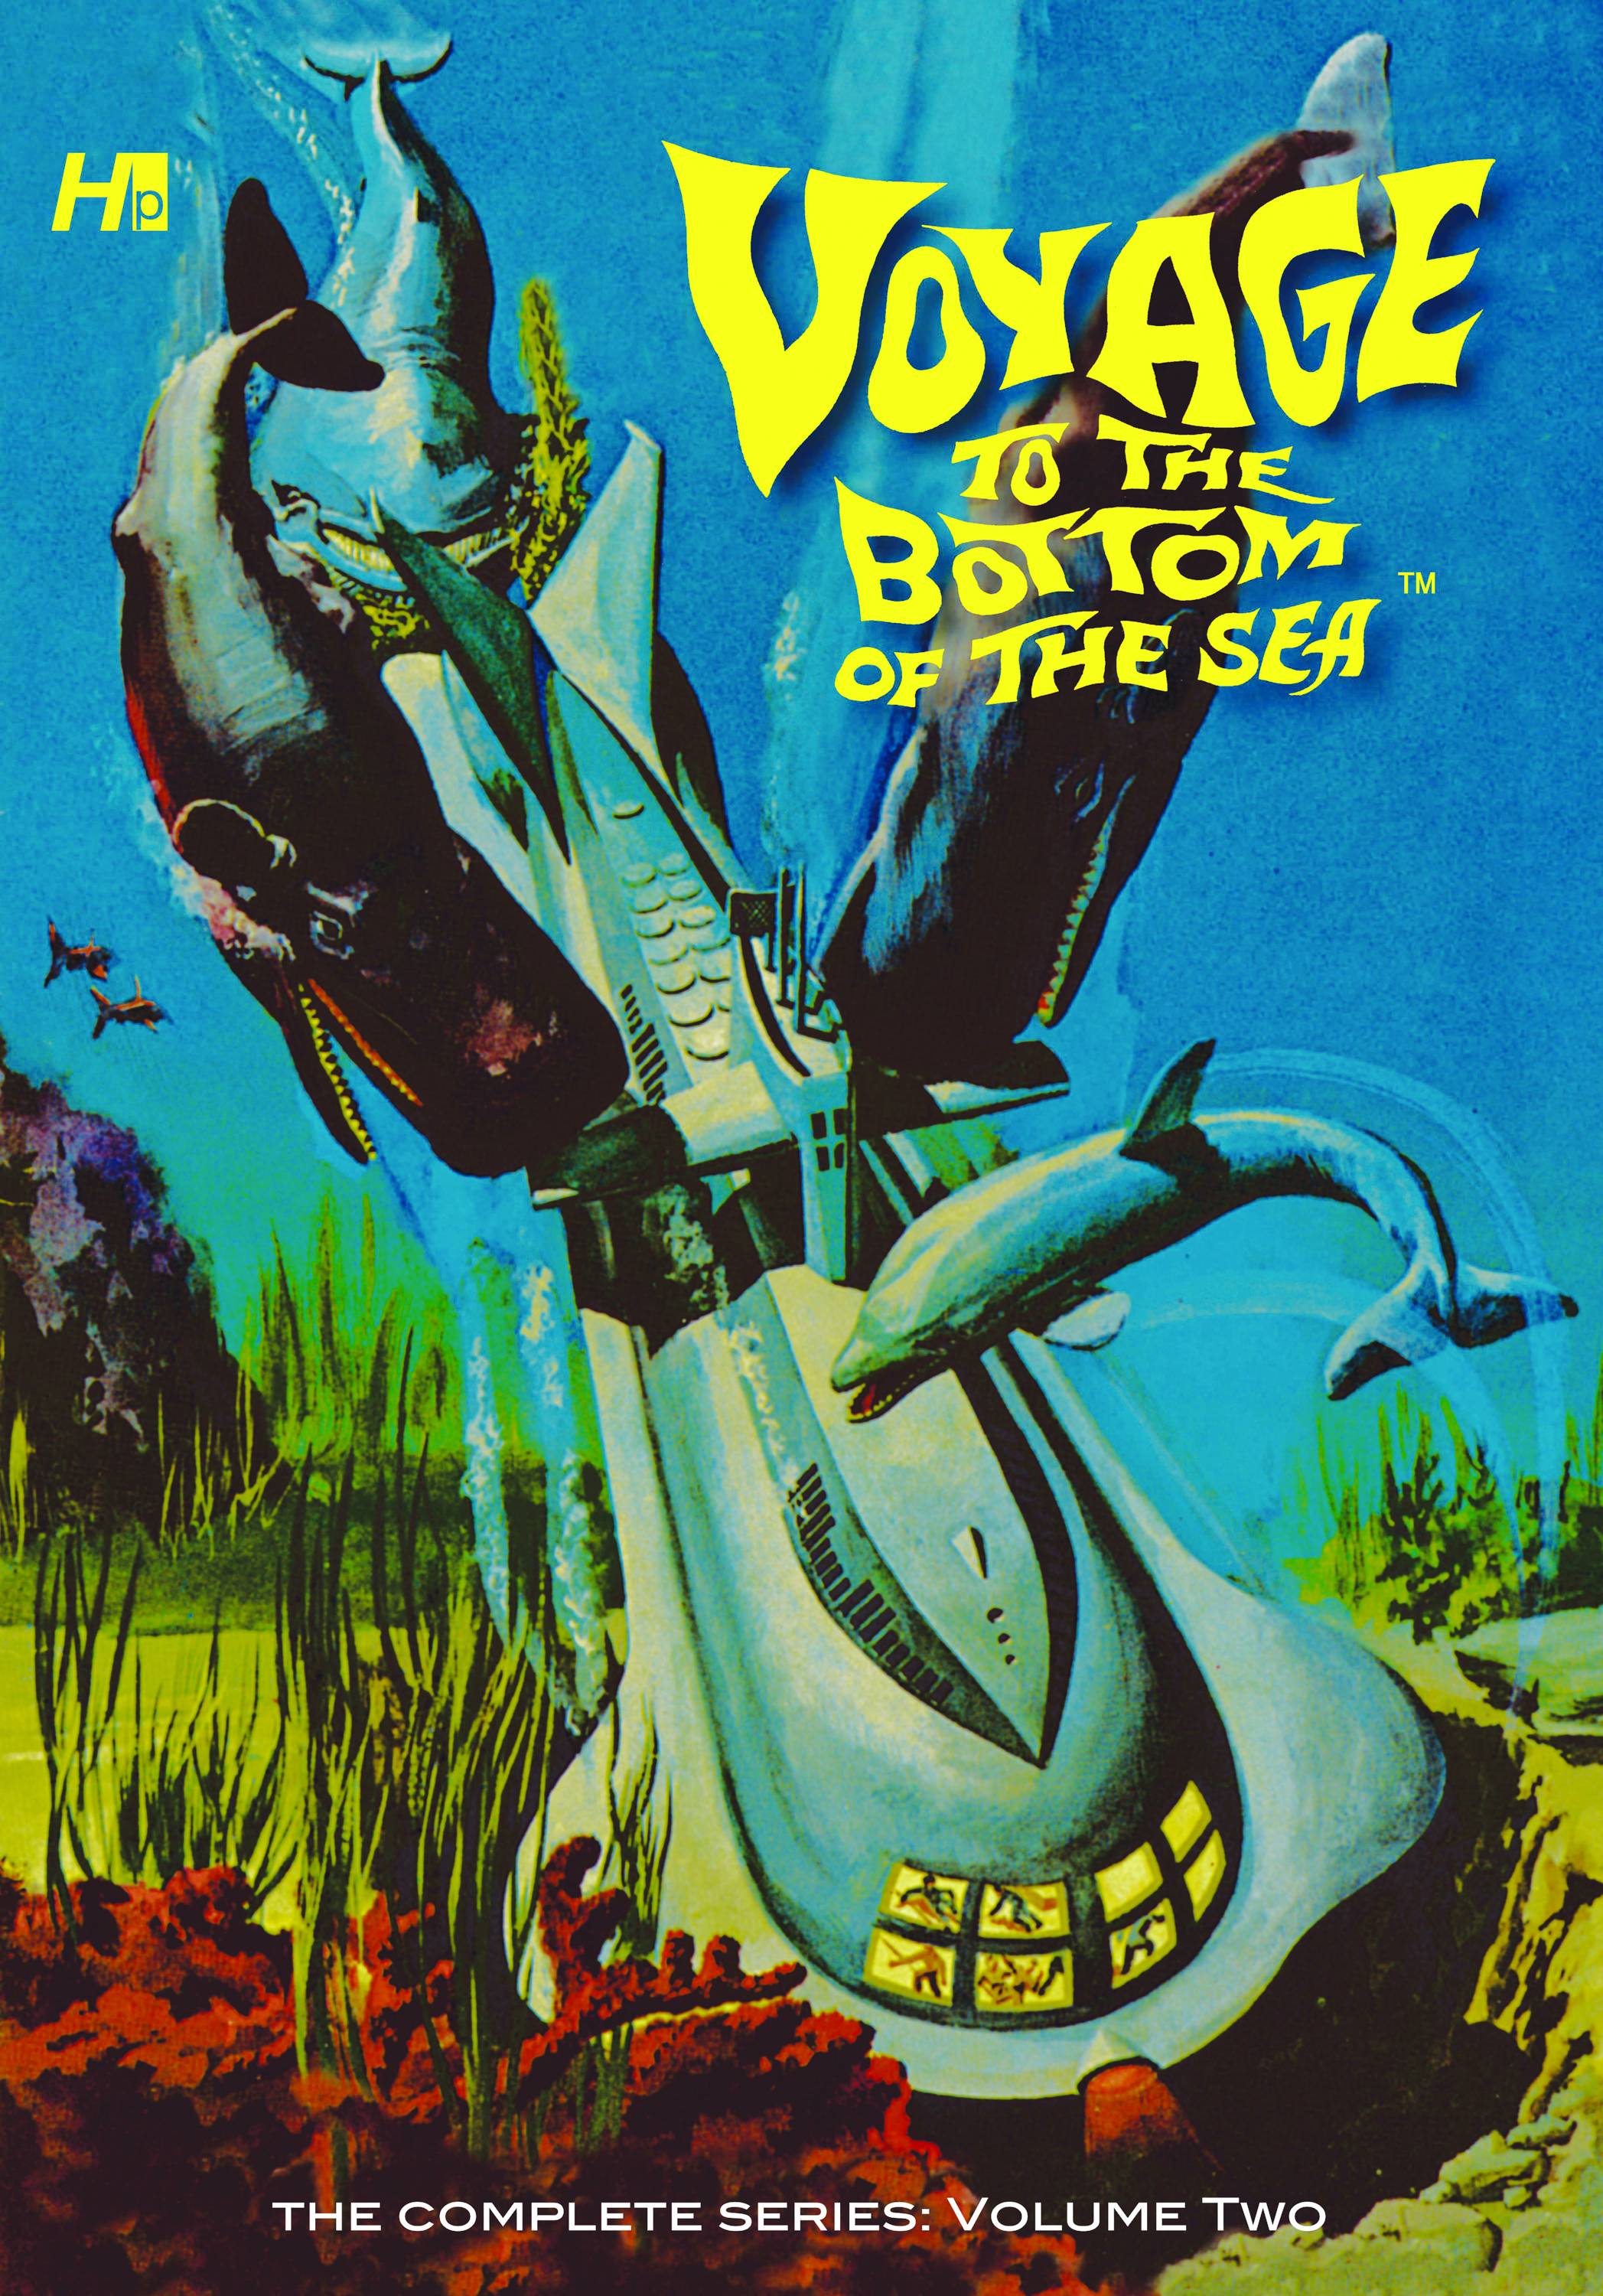 Voyage To Bottom of the Sea Complete Series Hardcover Volume 2